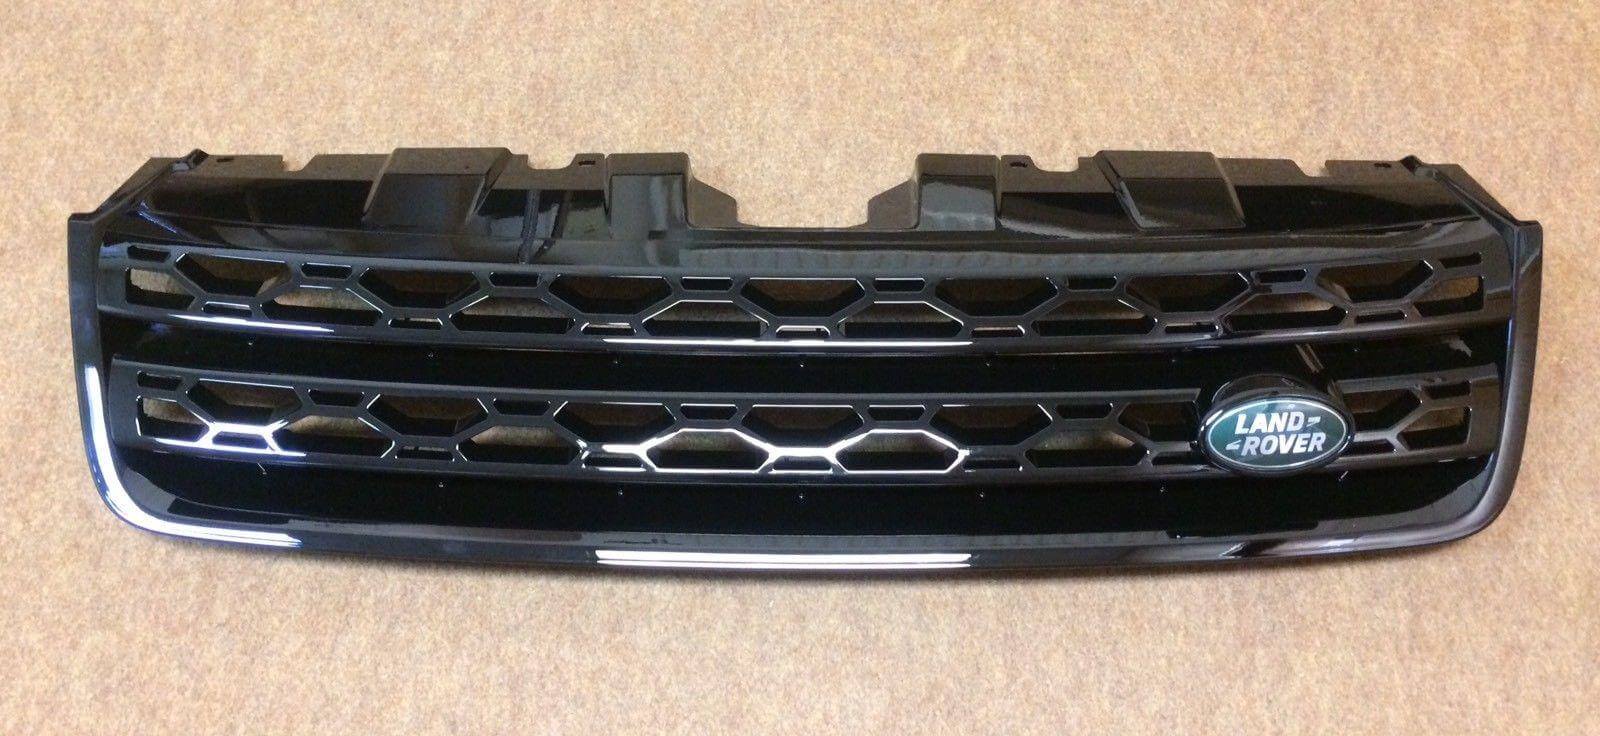 LAND ROVER DISCOVERY SPORT BLACK GLOSS FRONT GRILLE UPGRADE – LR097951.